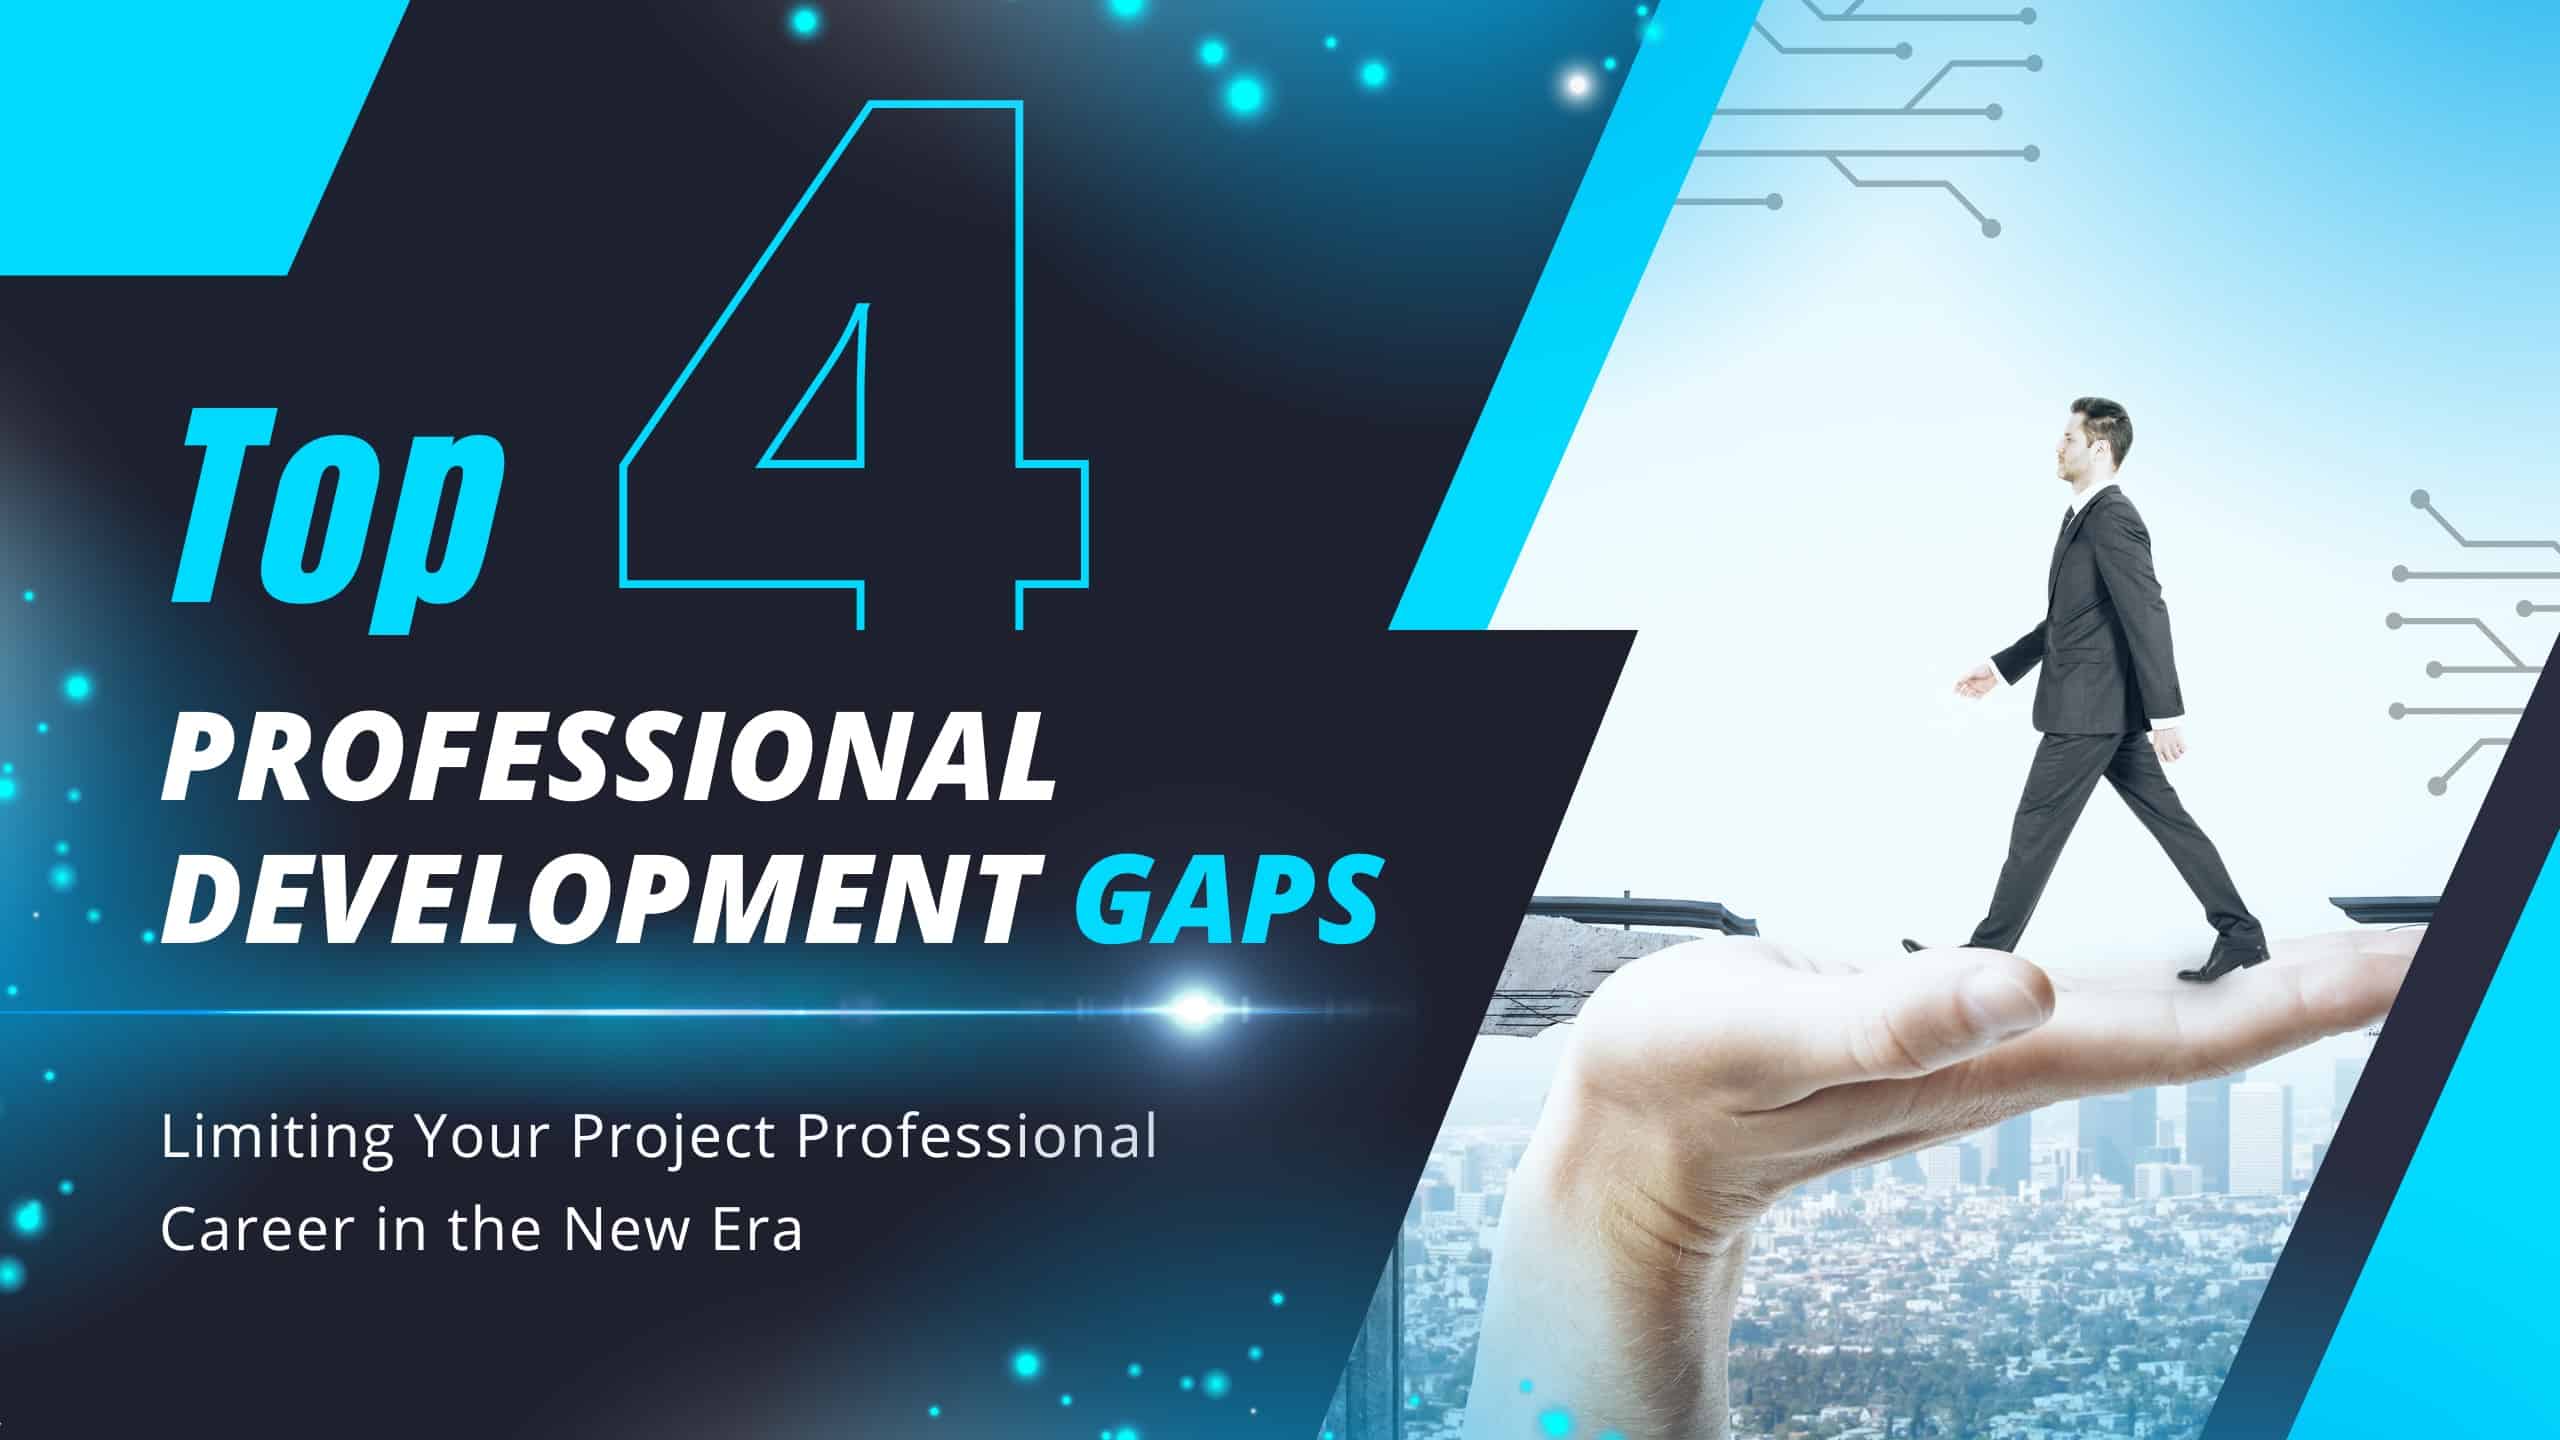 Top 4 Professional Development Gaps Limiting Your Project Professional Career in the New Era